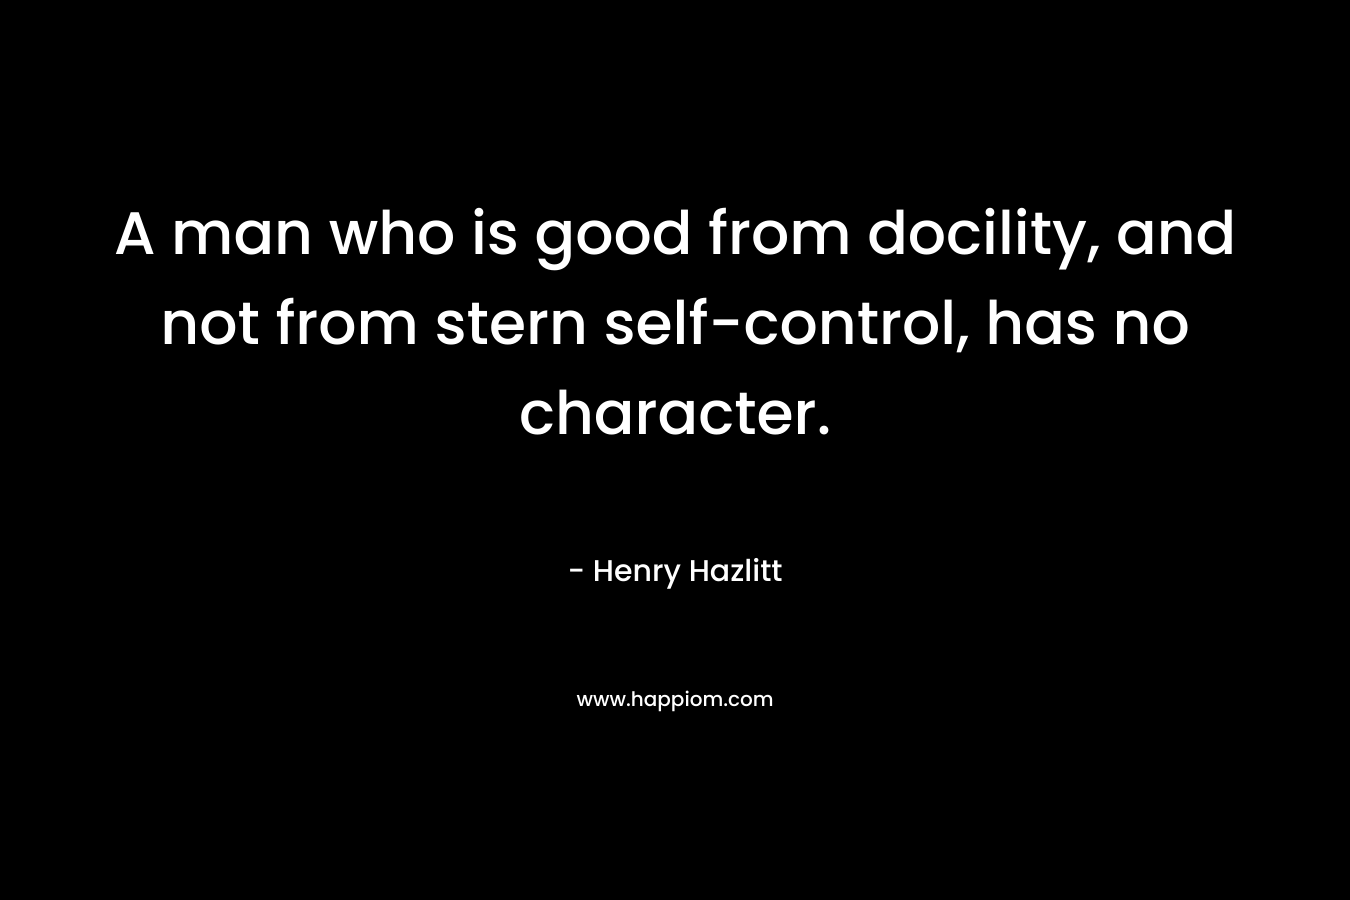 A man who is good from docility, and not from stern self-control, has no character. – Henry Hazlitt